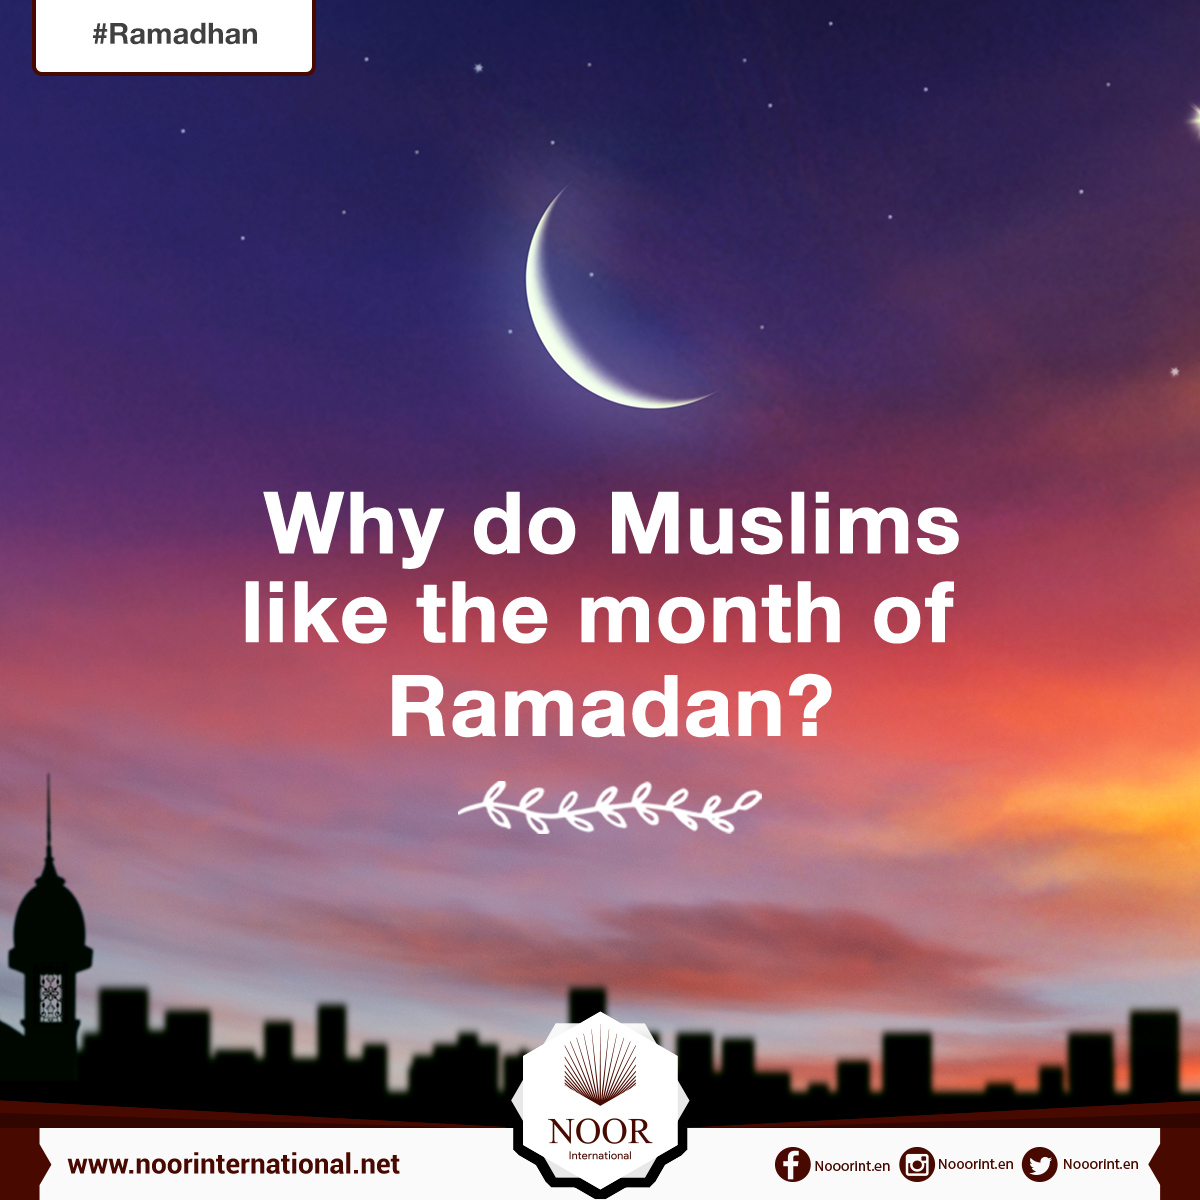 Why do Muslims like the month of Ramadan?